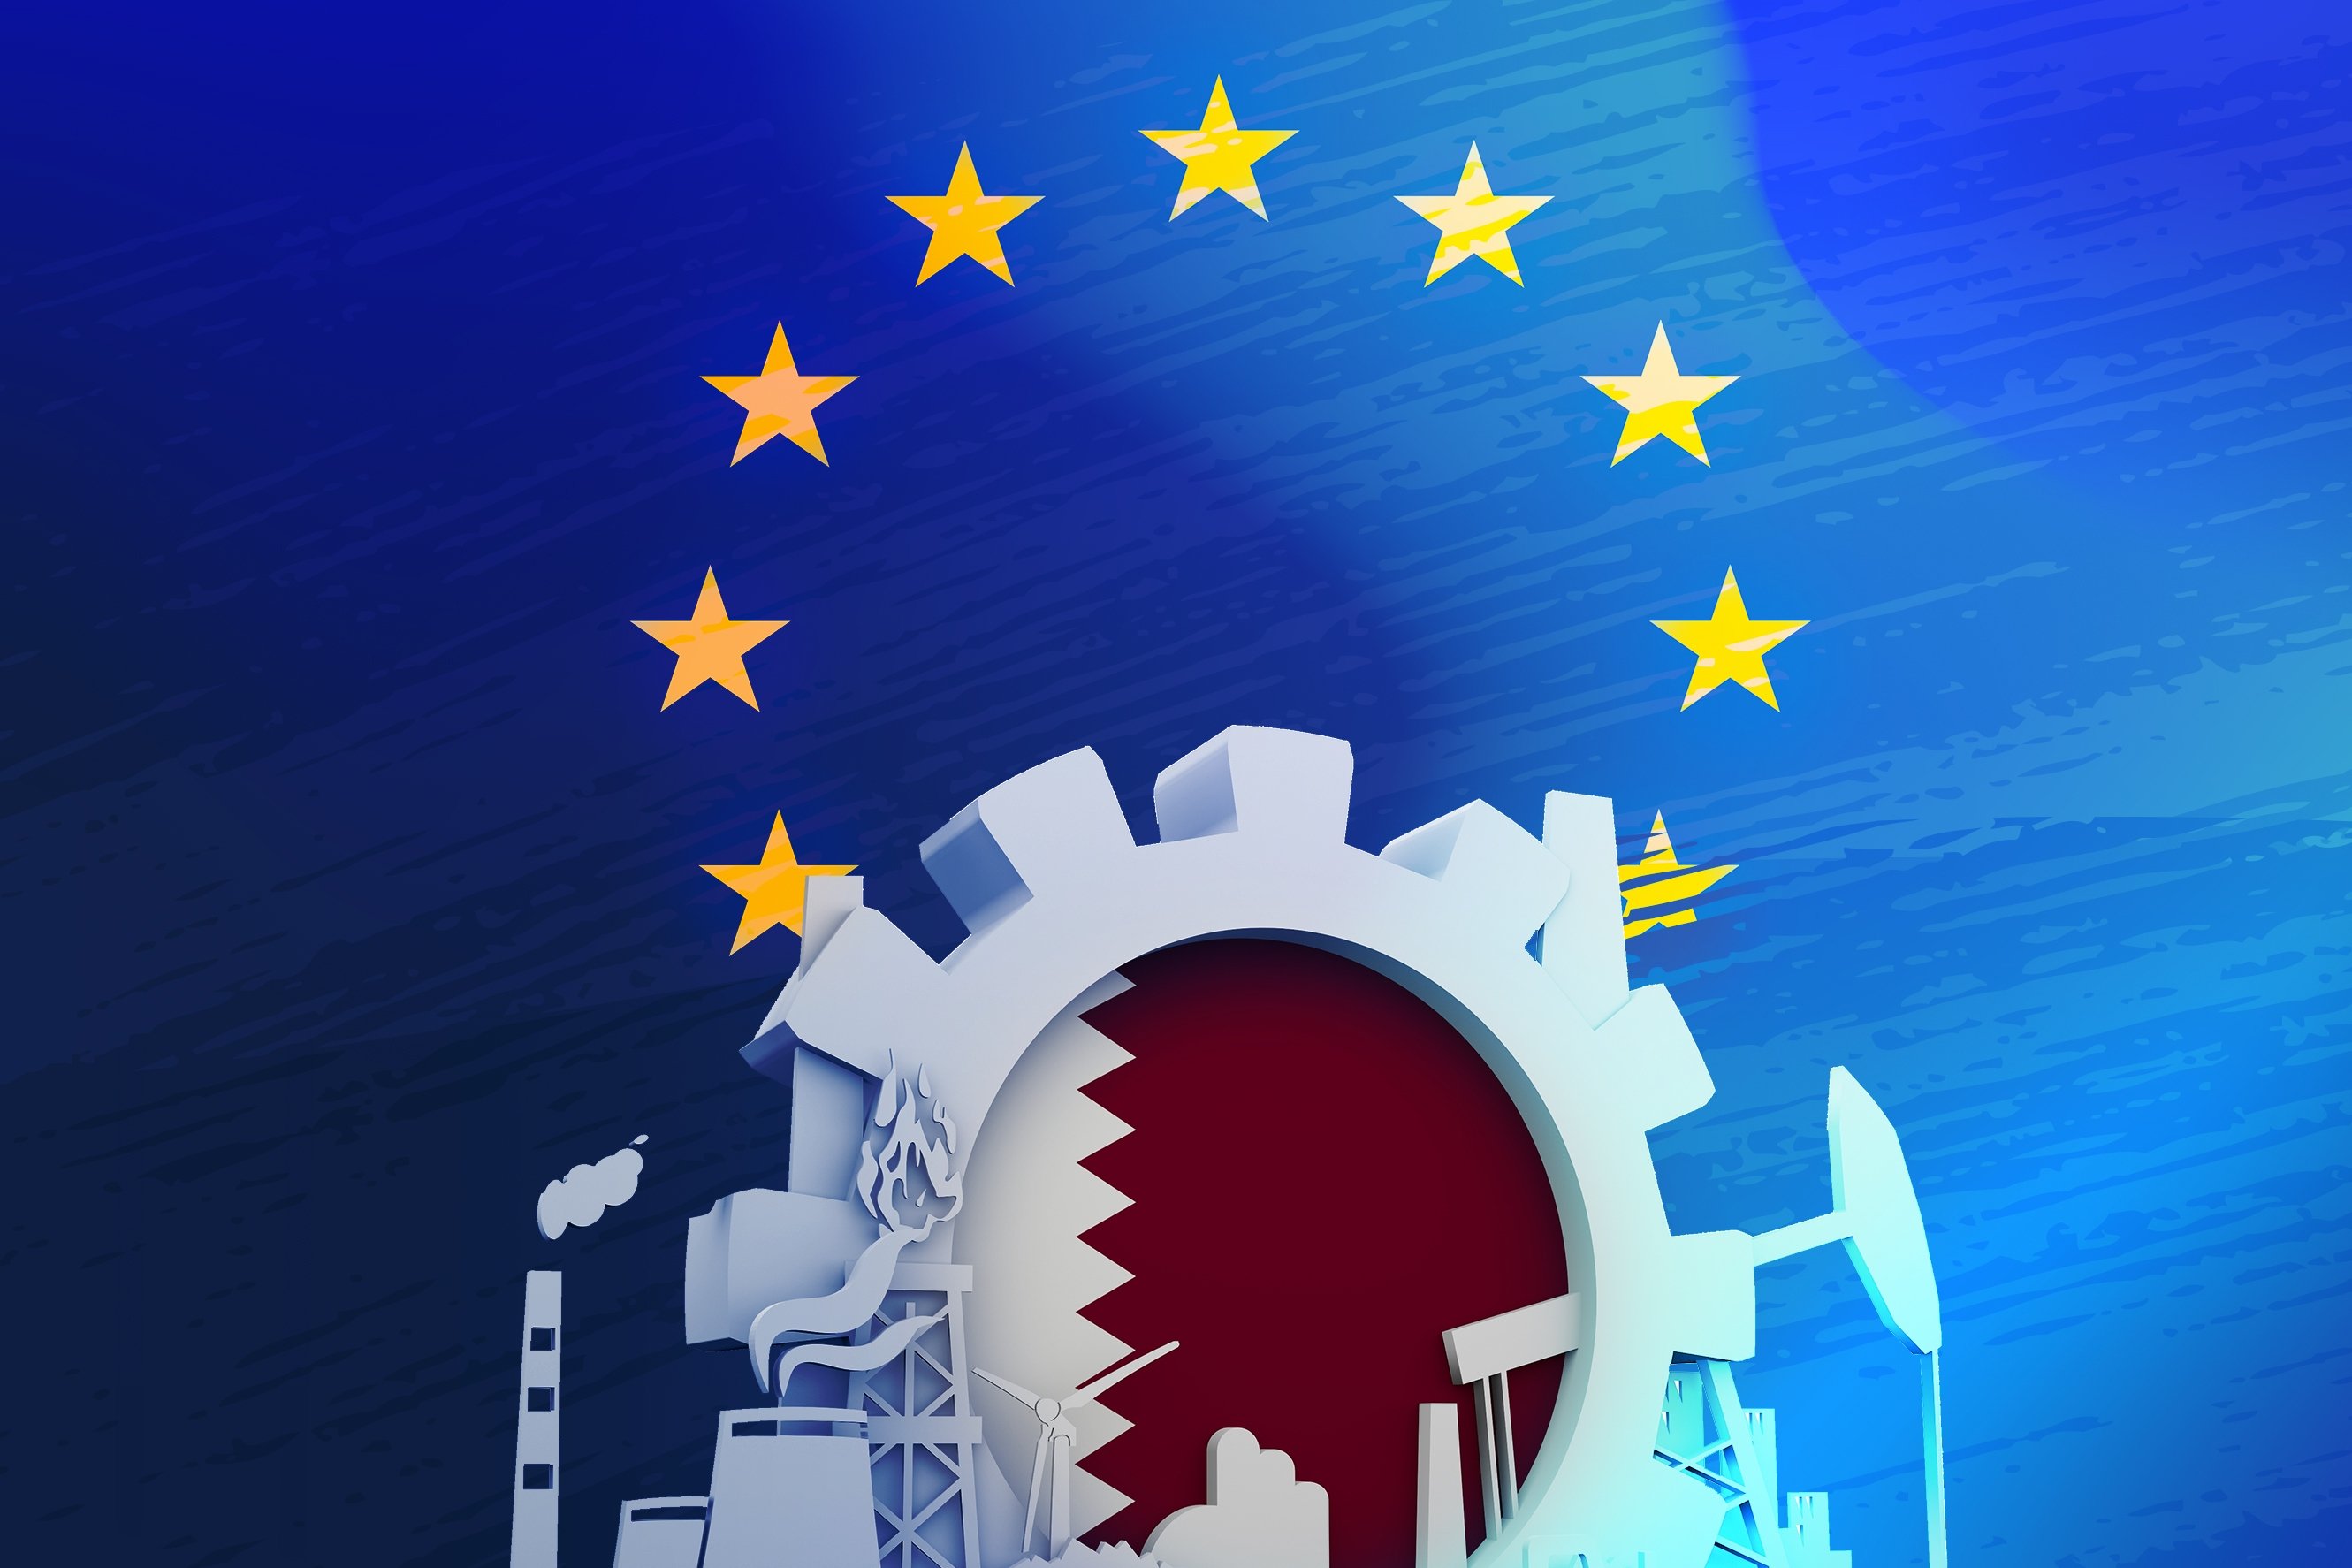 Qatar's role for the future of Europe's energy security | Opinion